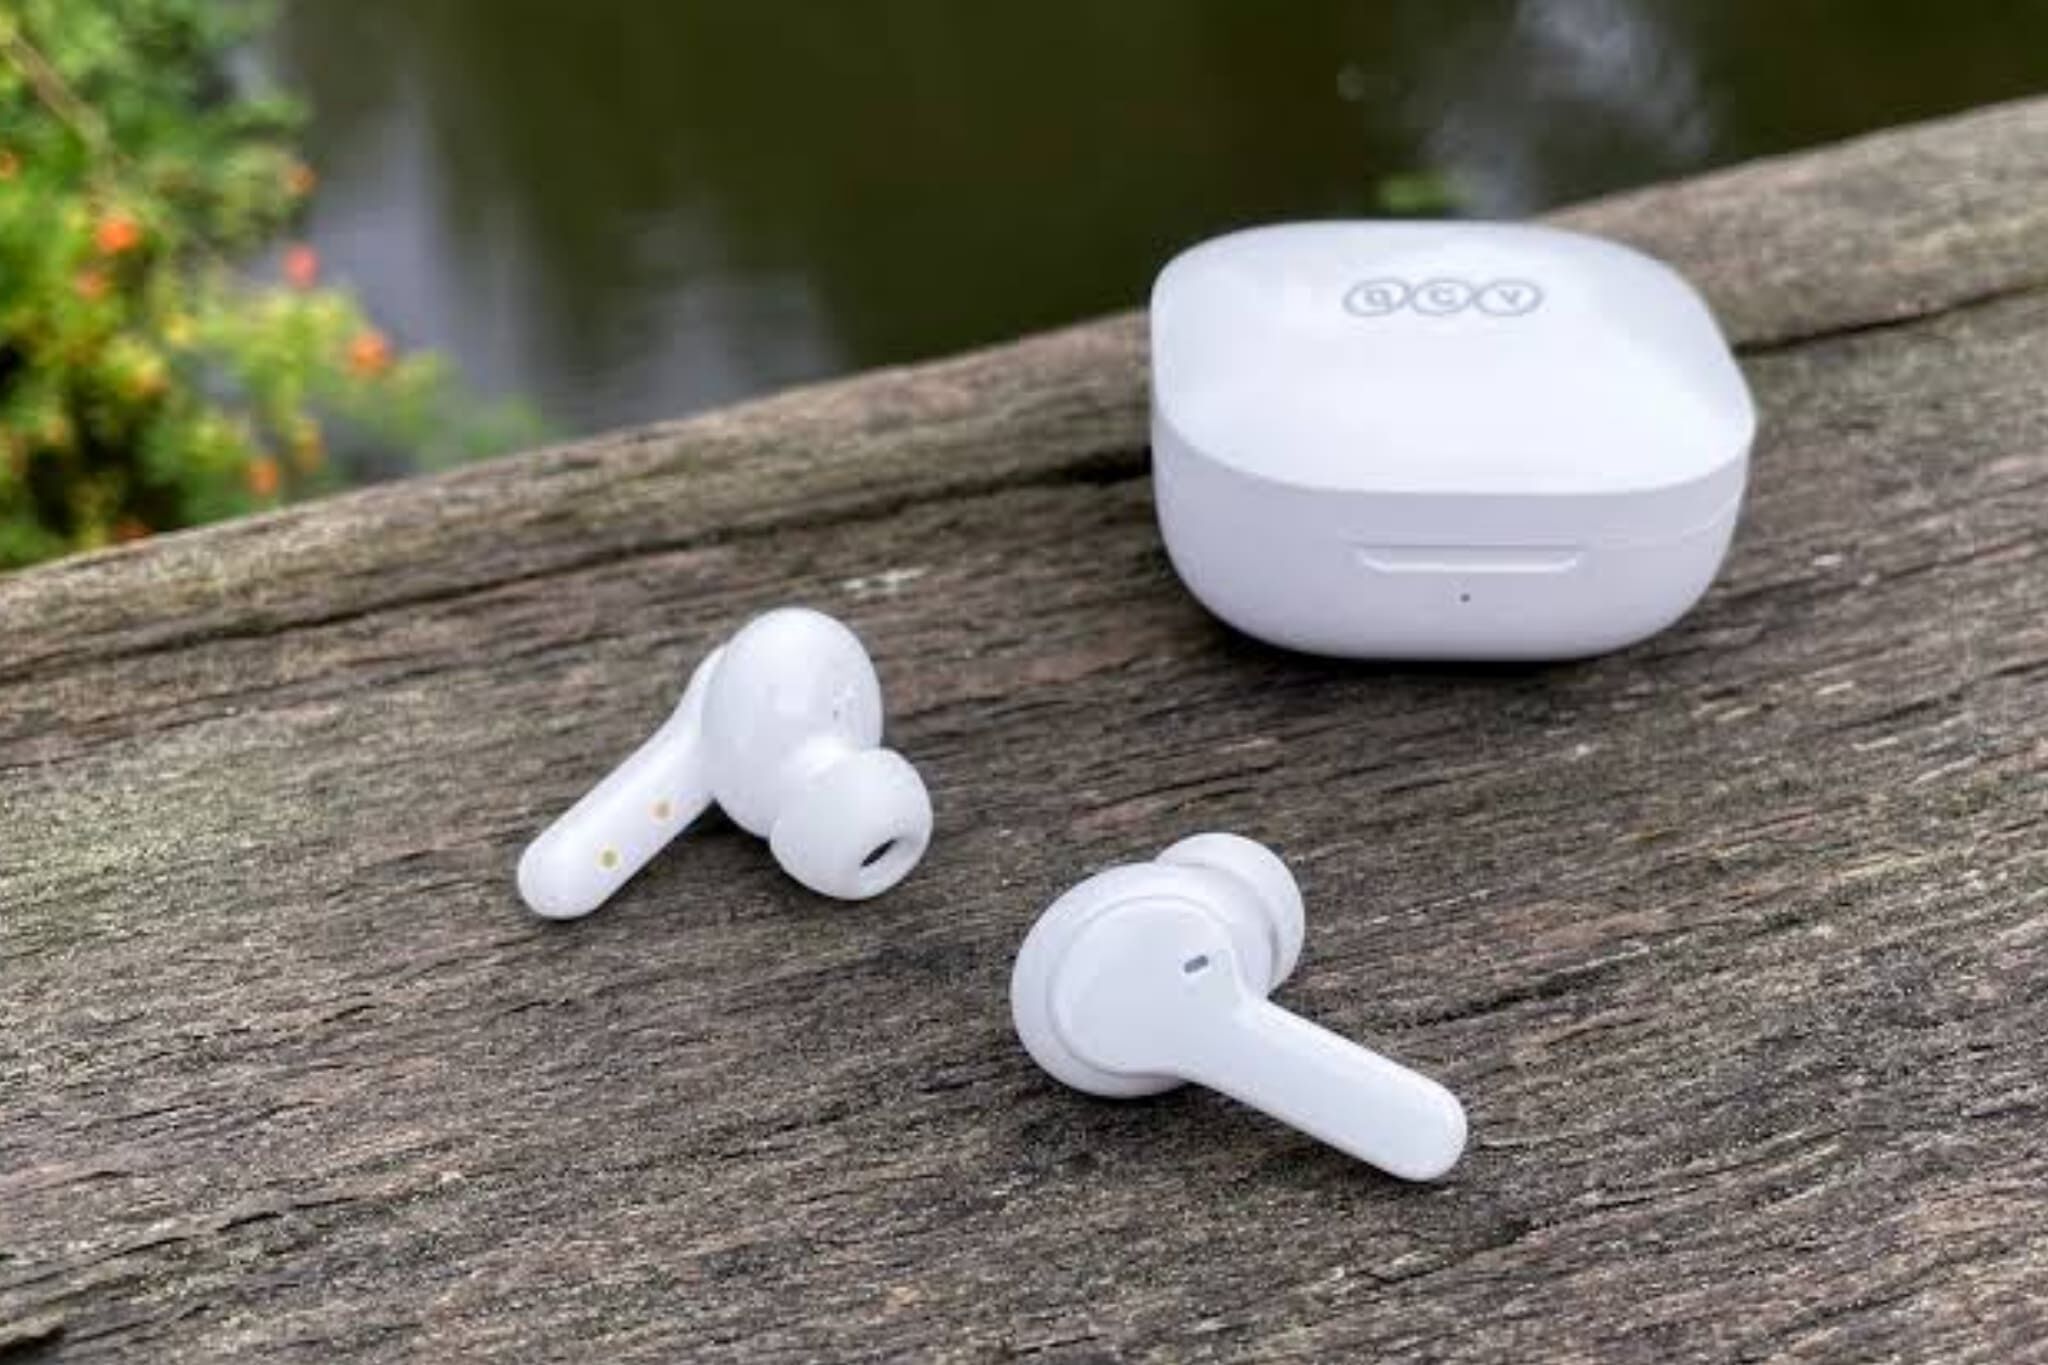 Best Earbuds Under Rs 1000: Earbuds from many brands including Mivi and Croma available under Rs 1000, see list